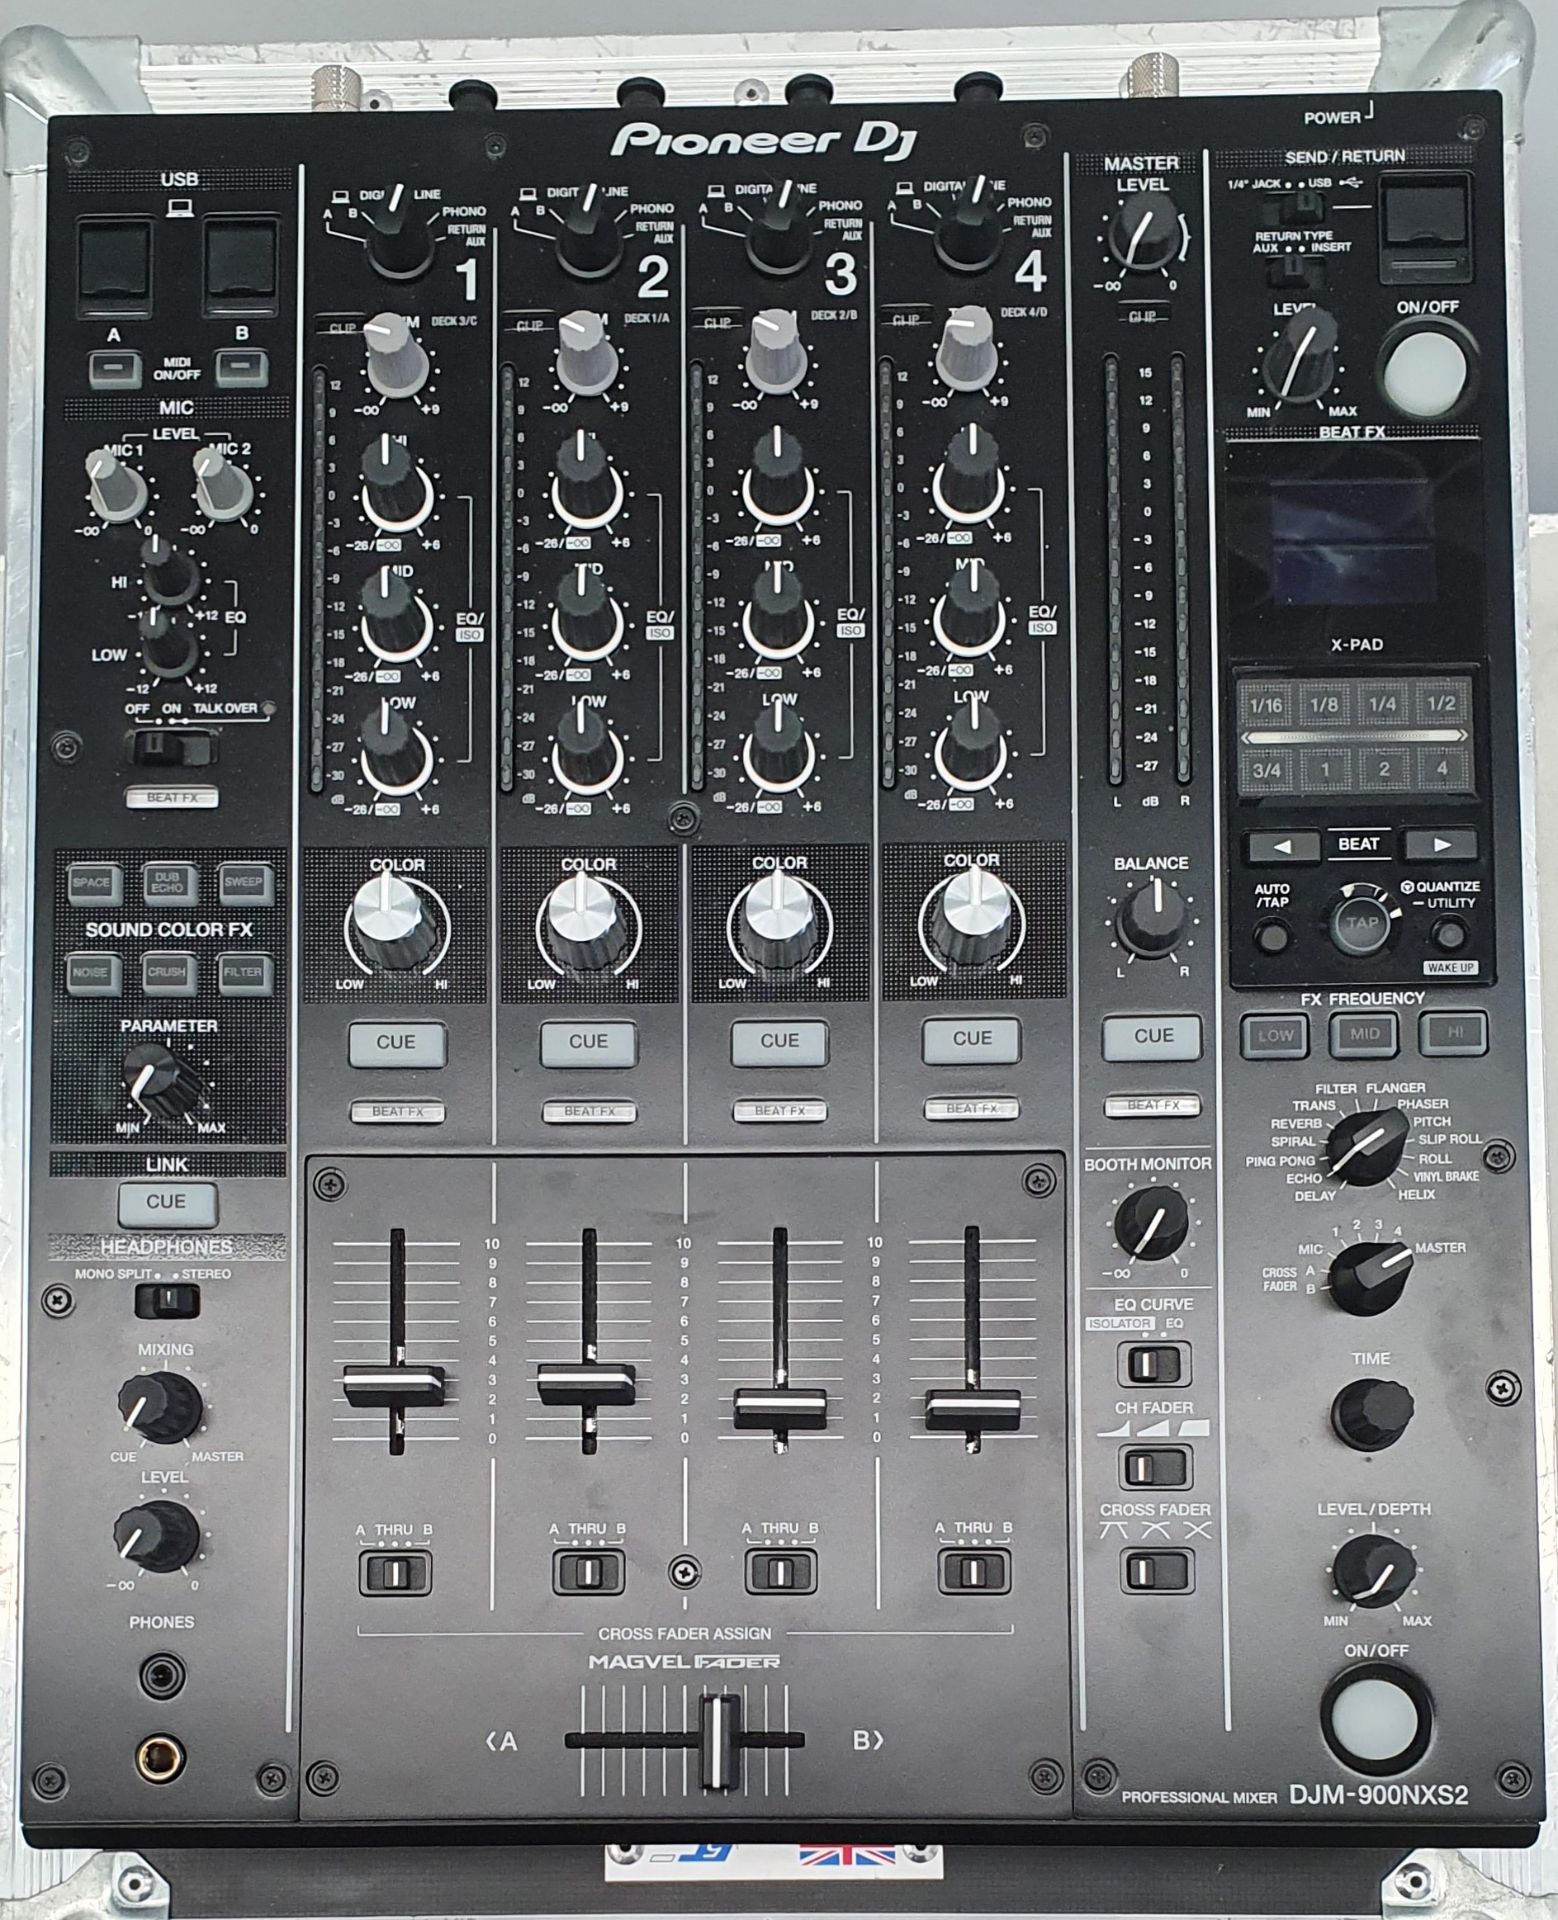 A Pioneer DJM-900NXS2 DJ Mixer No.QFMP014212EH with 5star flight case, 410mm x 540mm x 170mm (as - Image 2 of 3